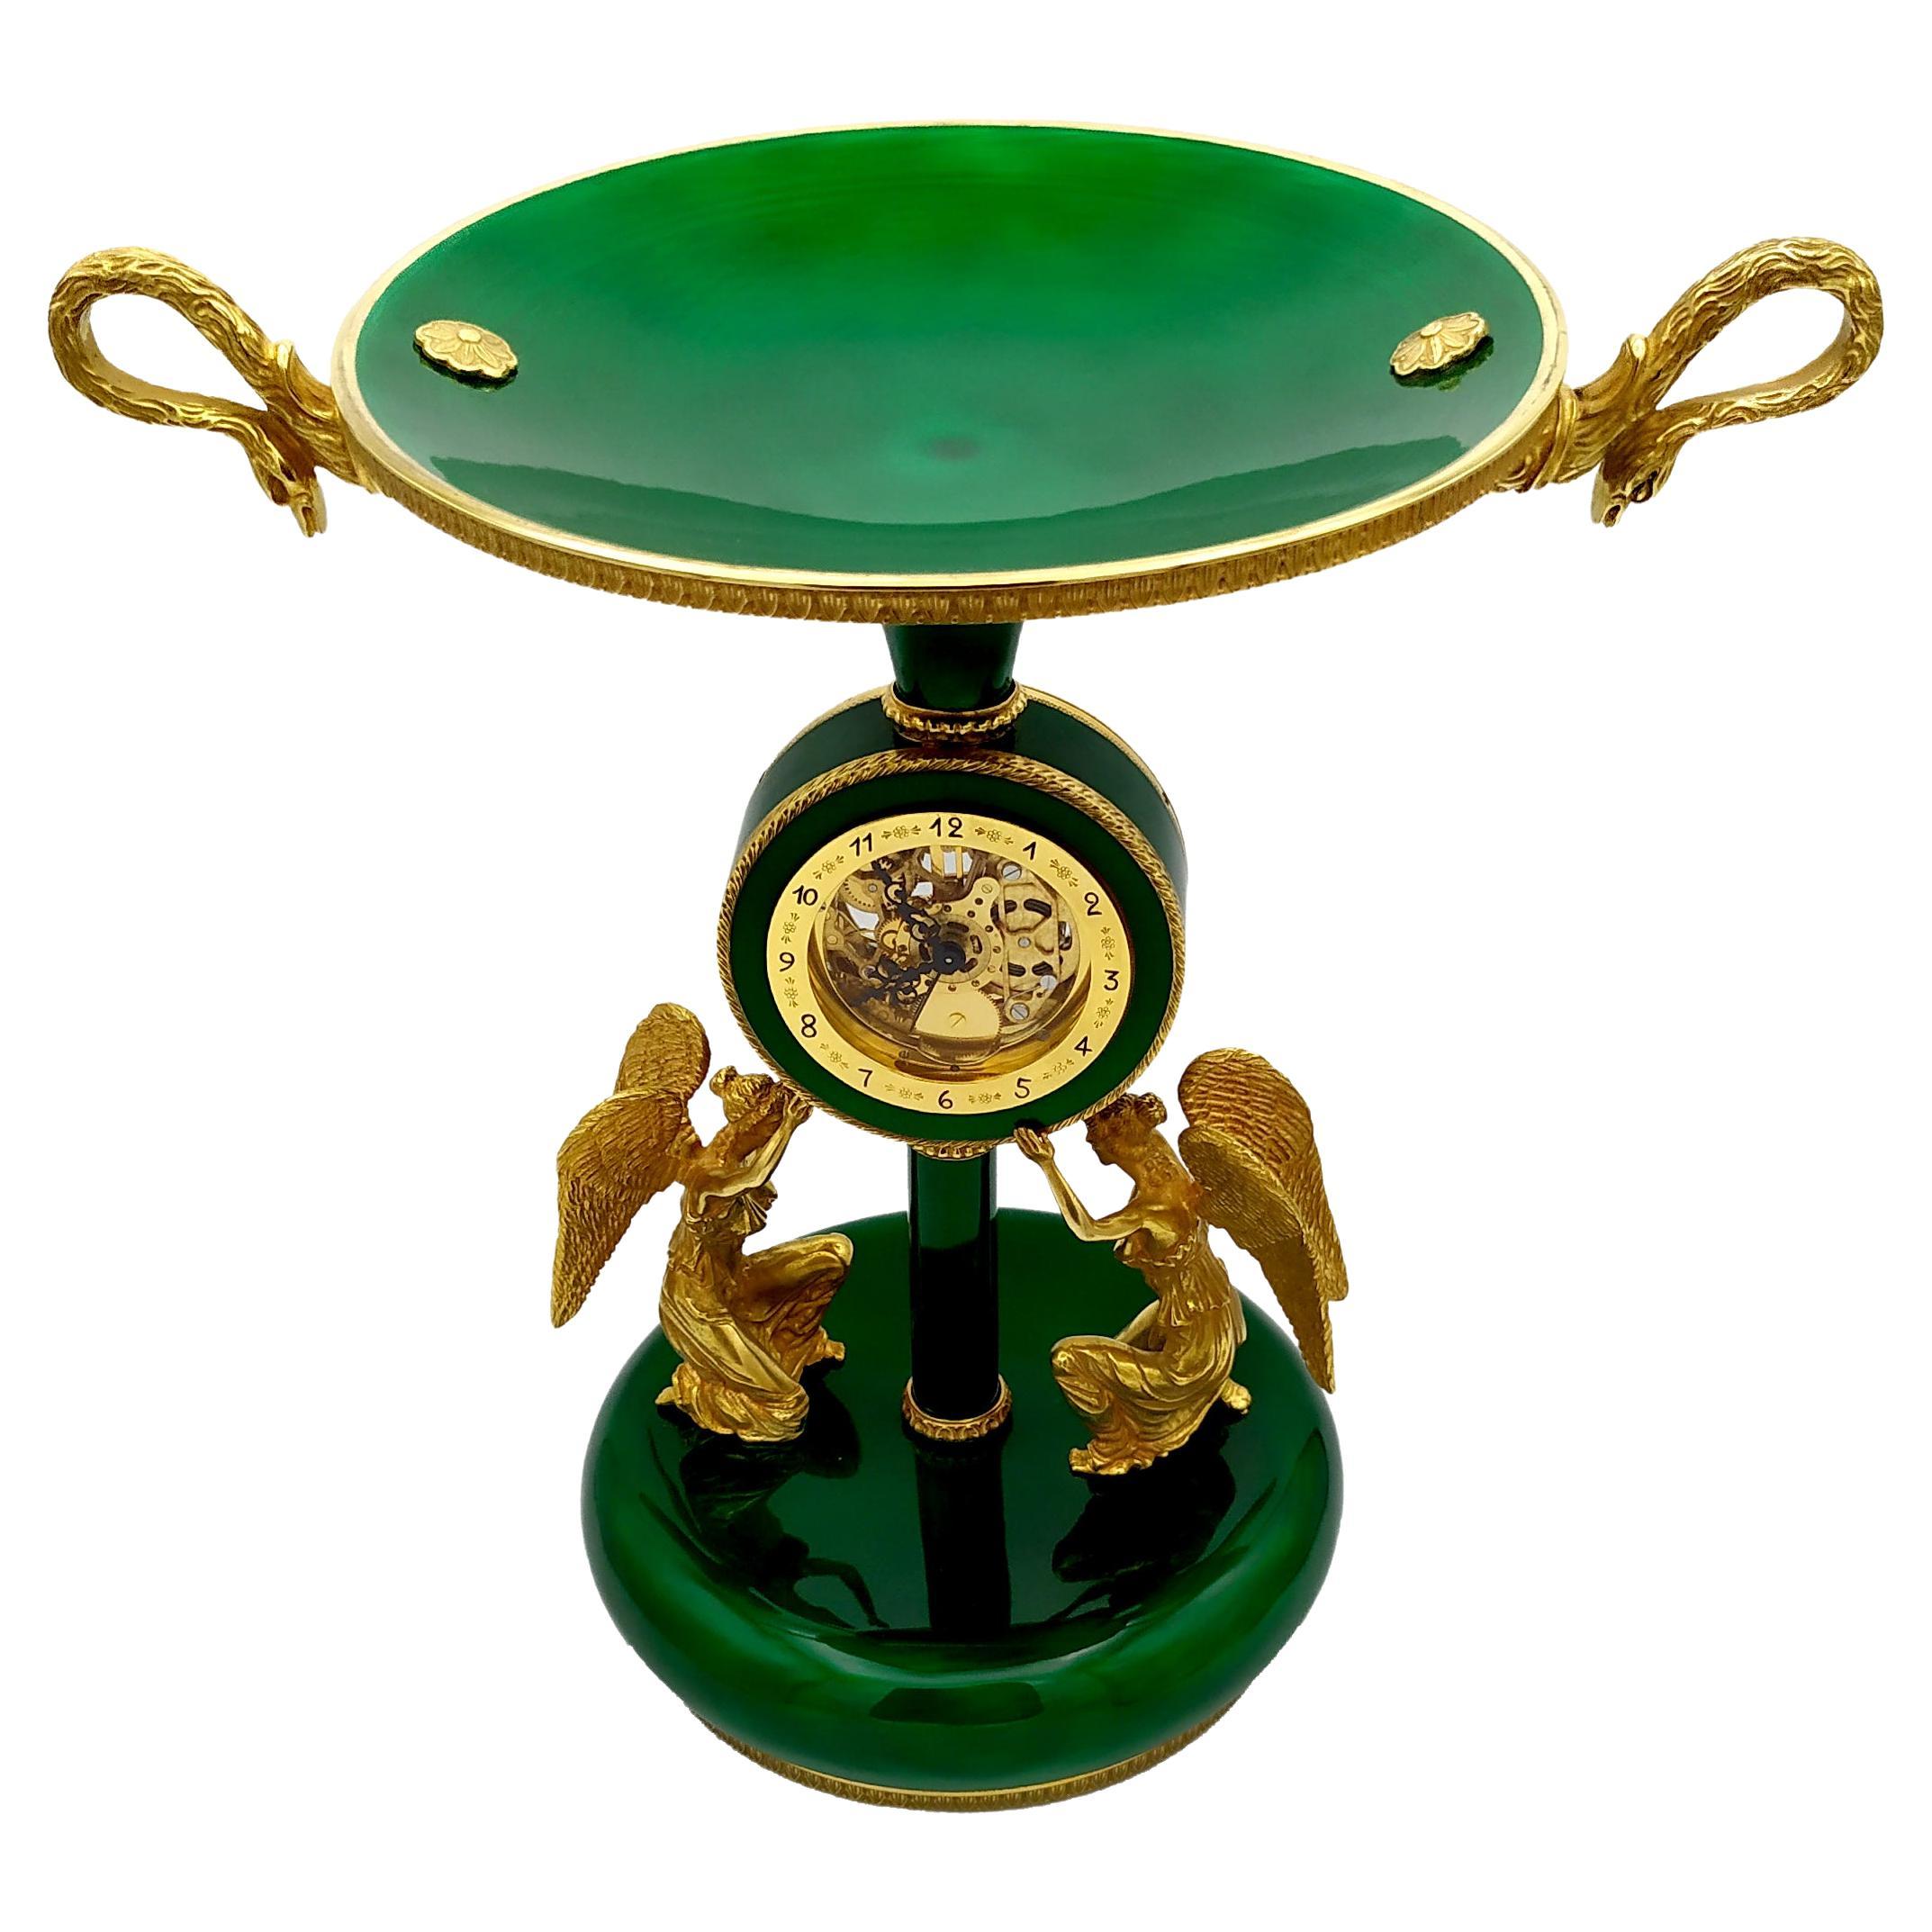 Salimbeni Green Centerpiece with Clock Fired Enamels on Guillochè